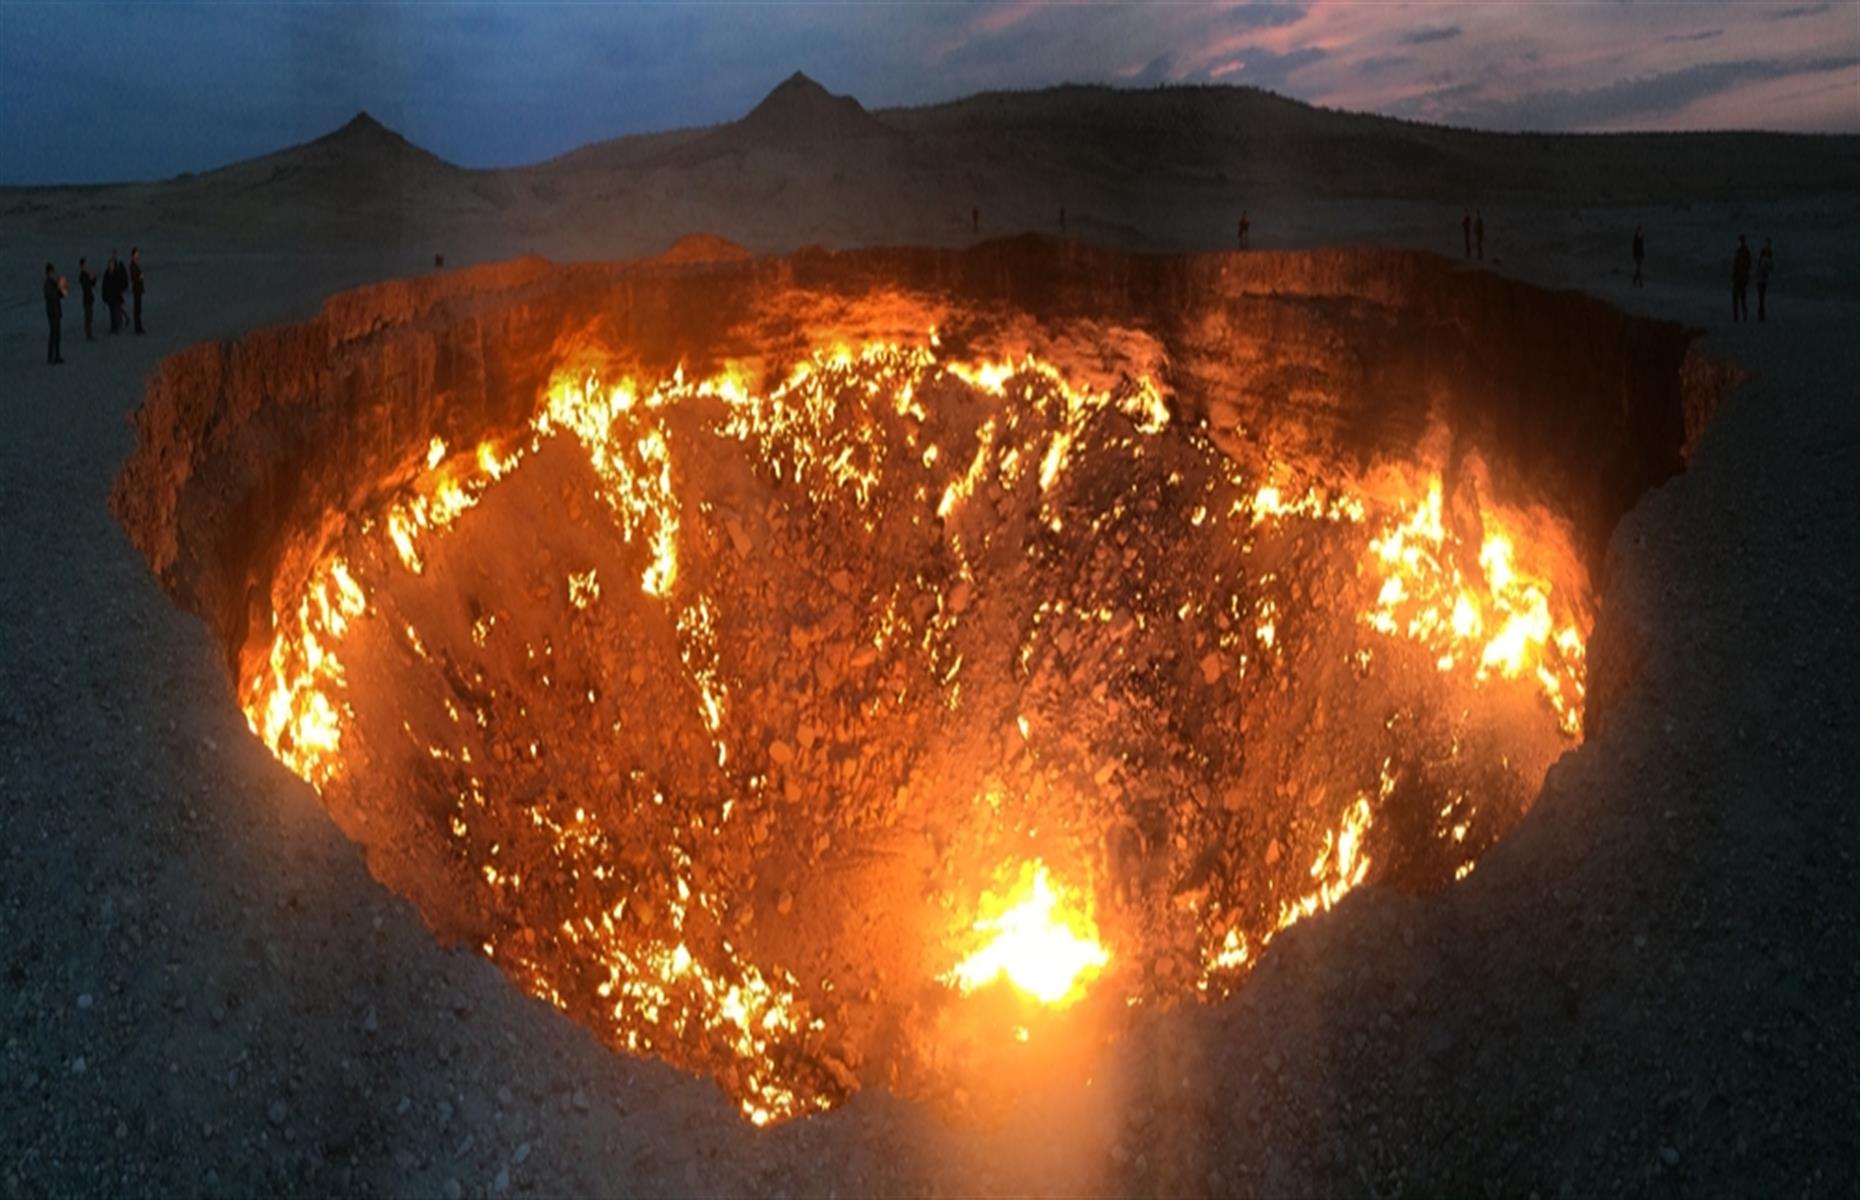 <p>It’s not exactly a top tourist attraction, but Turkmenistan’s Door to Hell is pretty fascinating. Officially called the Darvaza crater, it was caused by a Soviet oil rig drilling into a natural gas cavern in 1971 and has been burning ever since. Take an off-the-beaten-track tour to visit while you still can, as it's been reported that the Turkmenistan president wants to extinguish the fire (natural gas is an important resource for the country).</p>  <p><a href="https://www.loveexploring.com/galleries/89068/the-most-mysterious-places-on-earth?page=1"><strong>See more of the most mysterious places on Earth</strong></a></p>